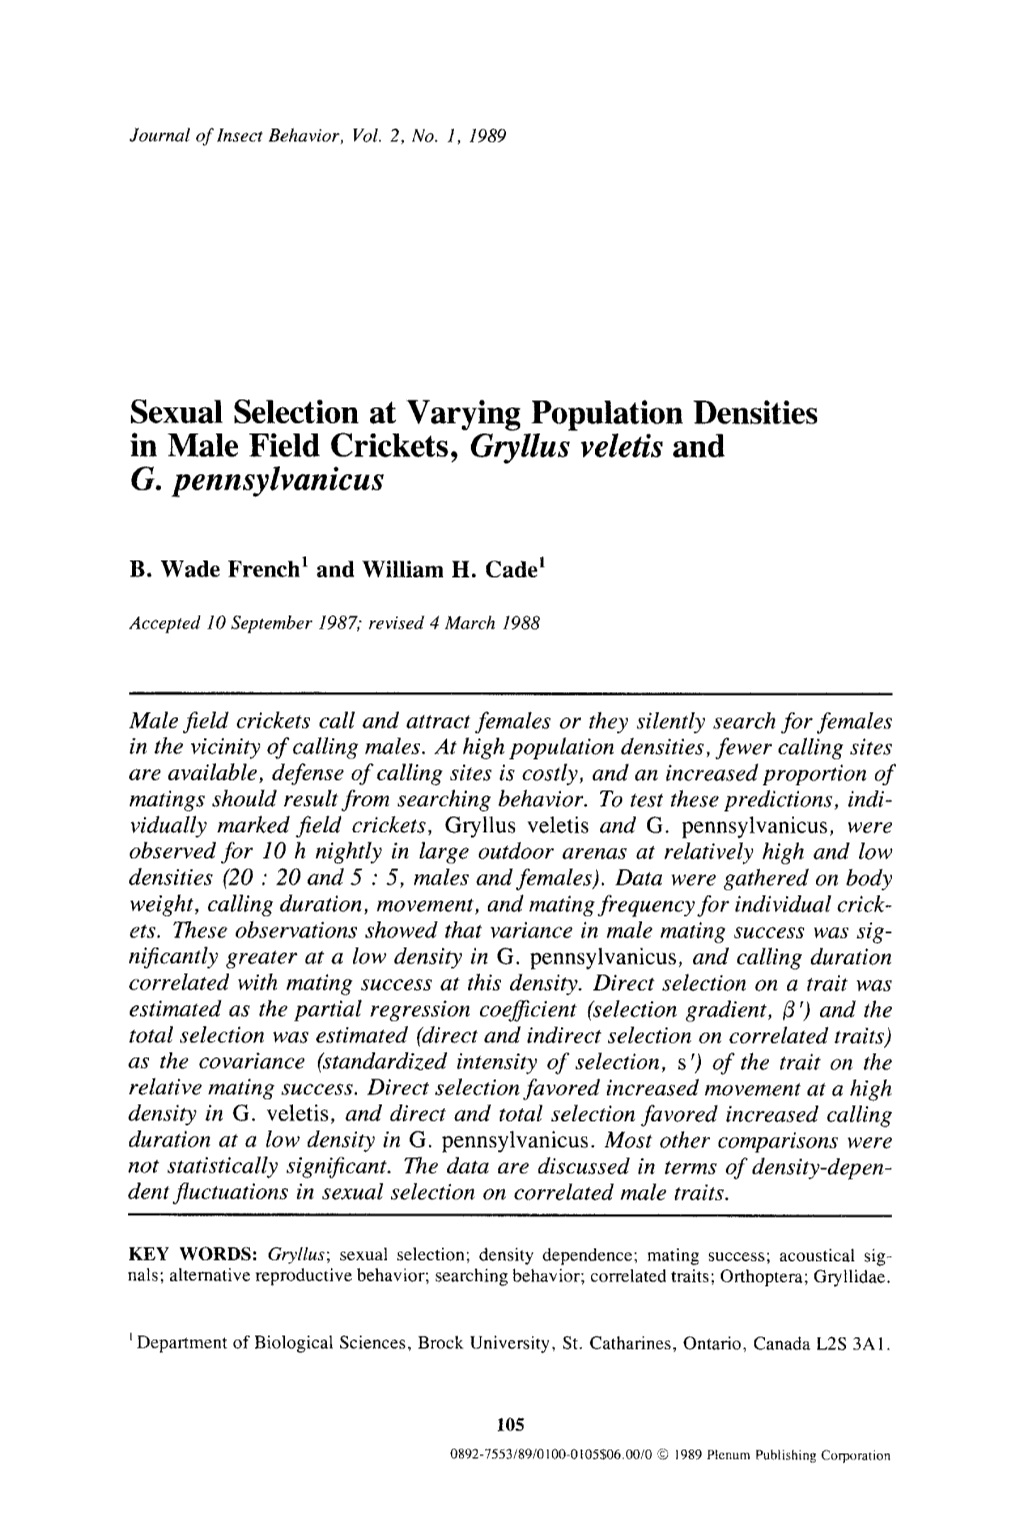 Sexual Selection at Varying Population Densities in Male Field Crickets, Gryllus Veletis and G